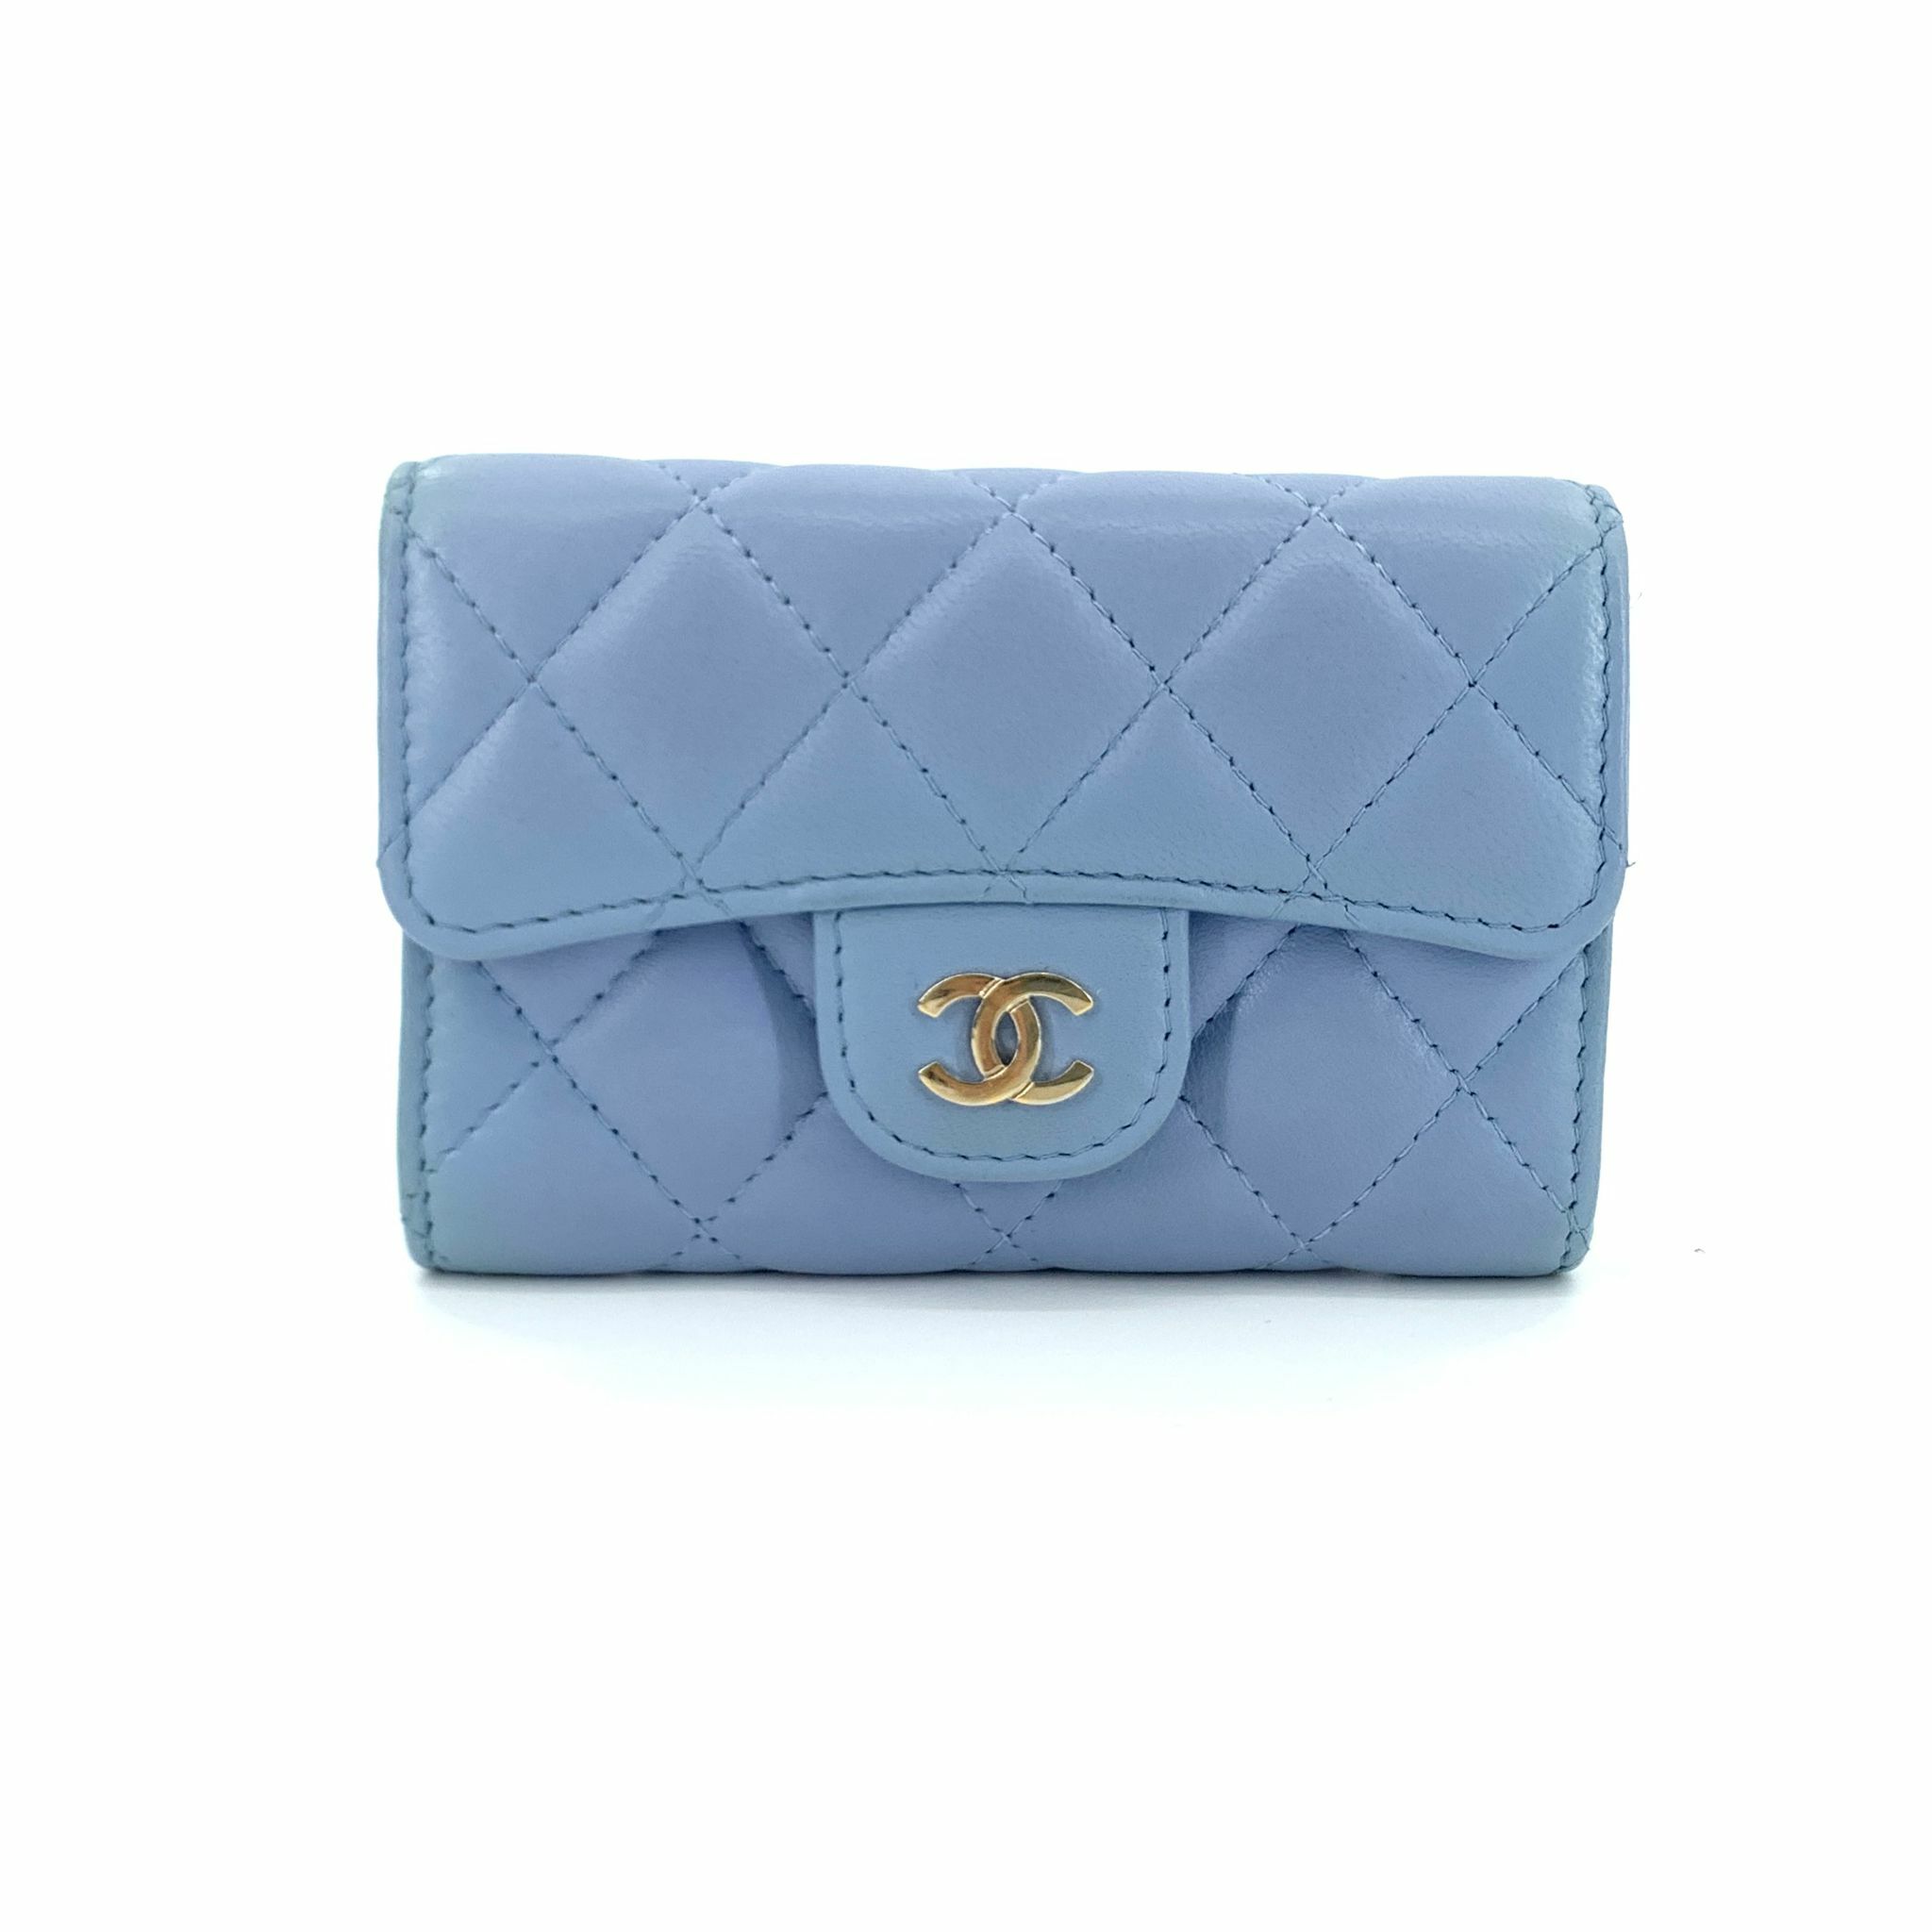 CHANEL PRE-OWNED CLASSIC CARD HOLDER AP0214